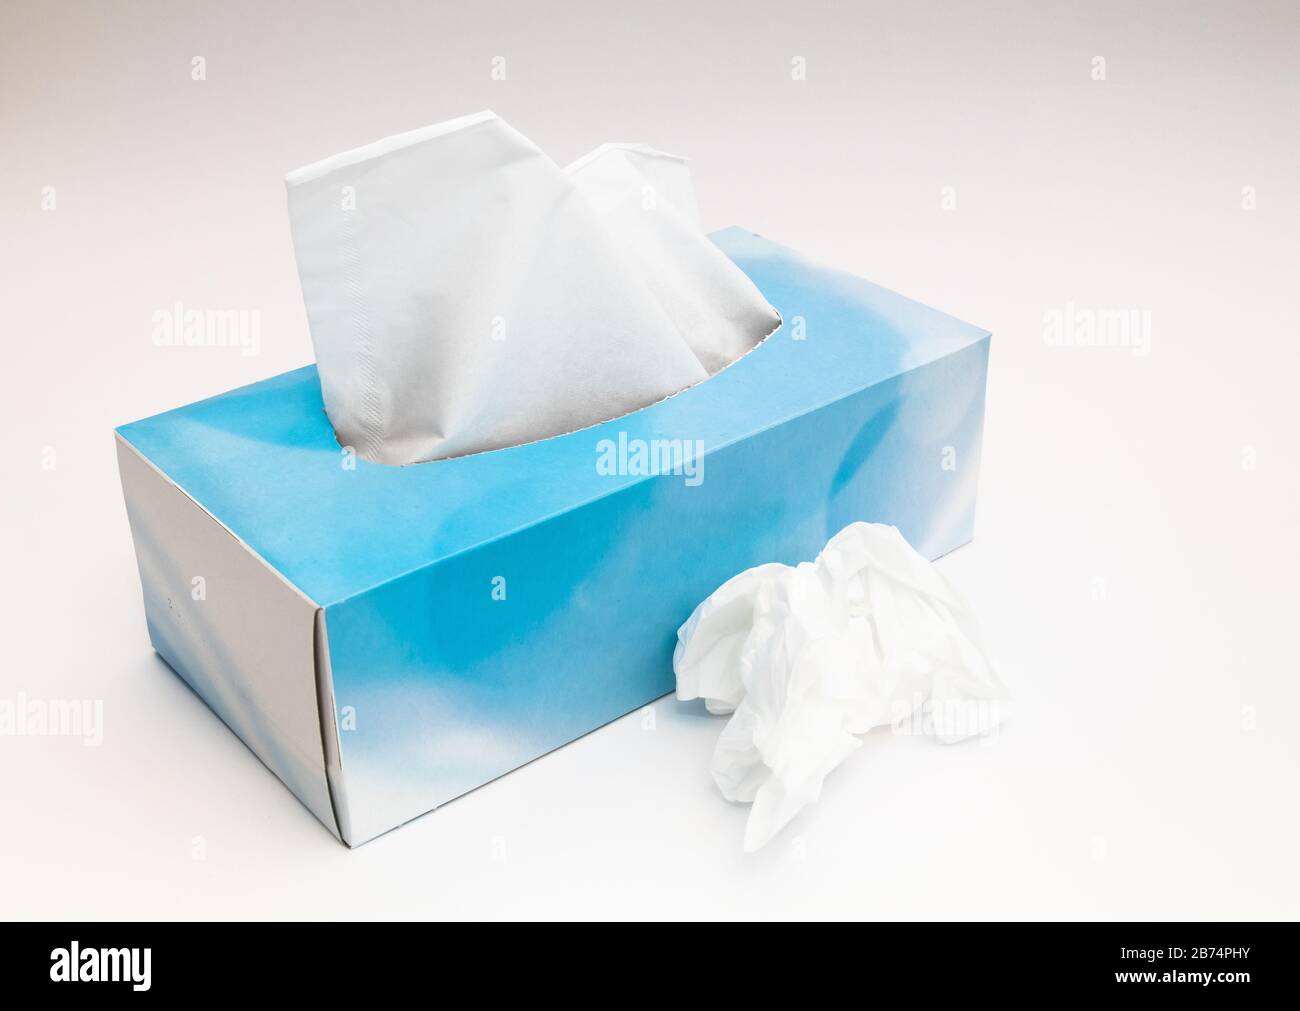 Box of paper tissues for sneezes and colds Stock Photo